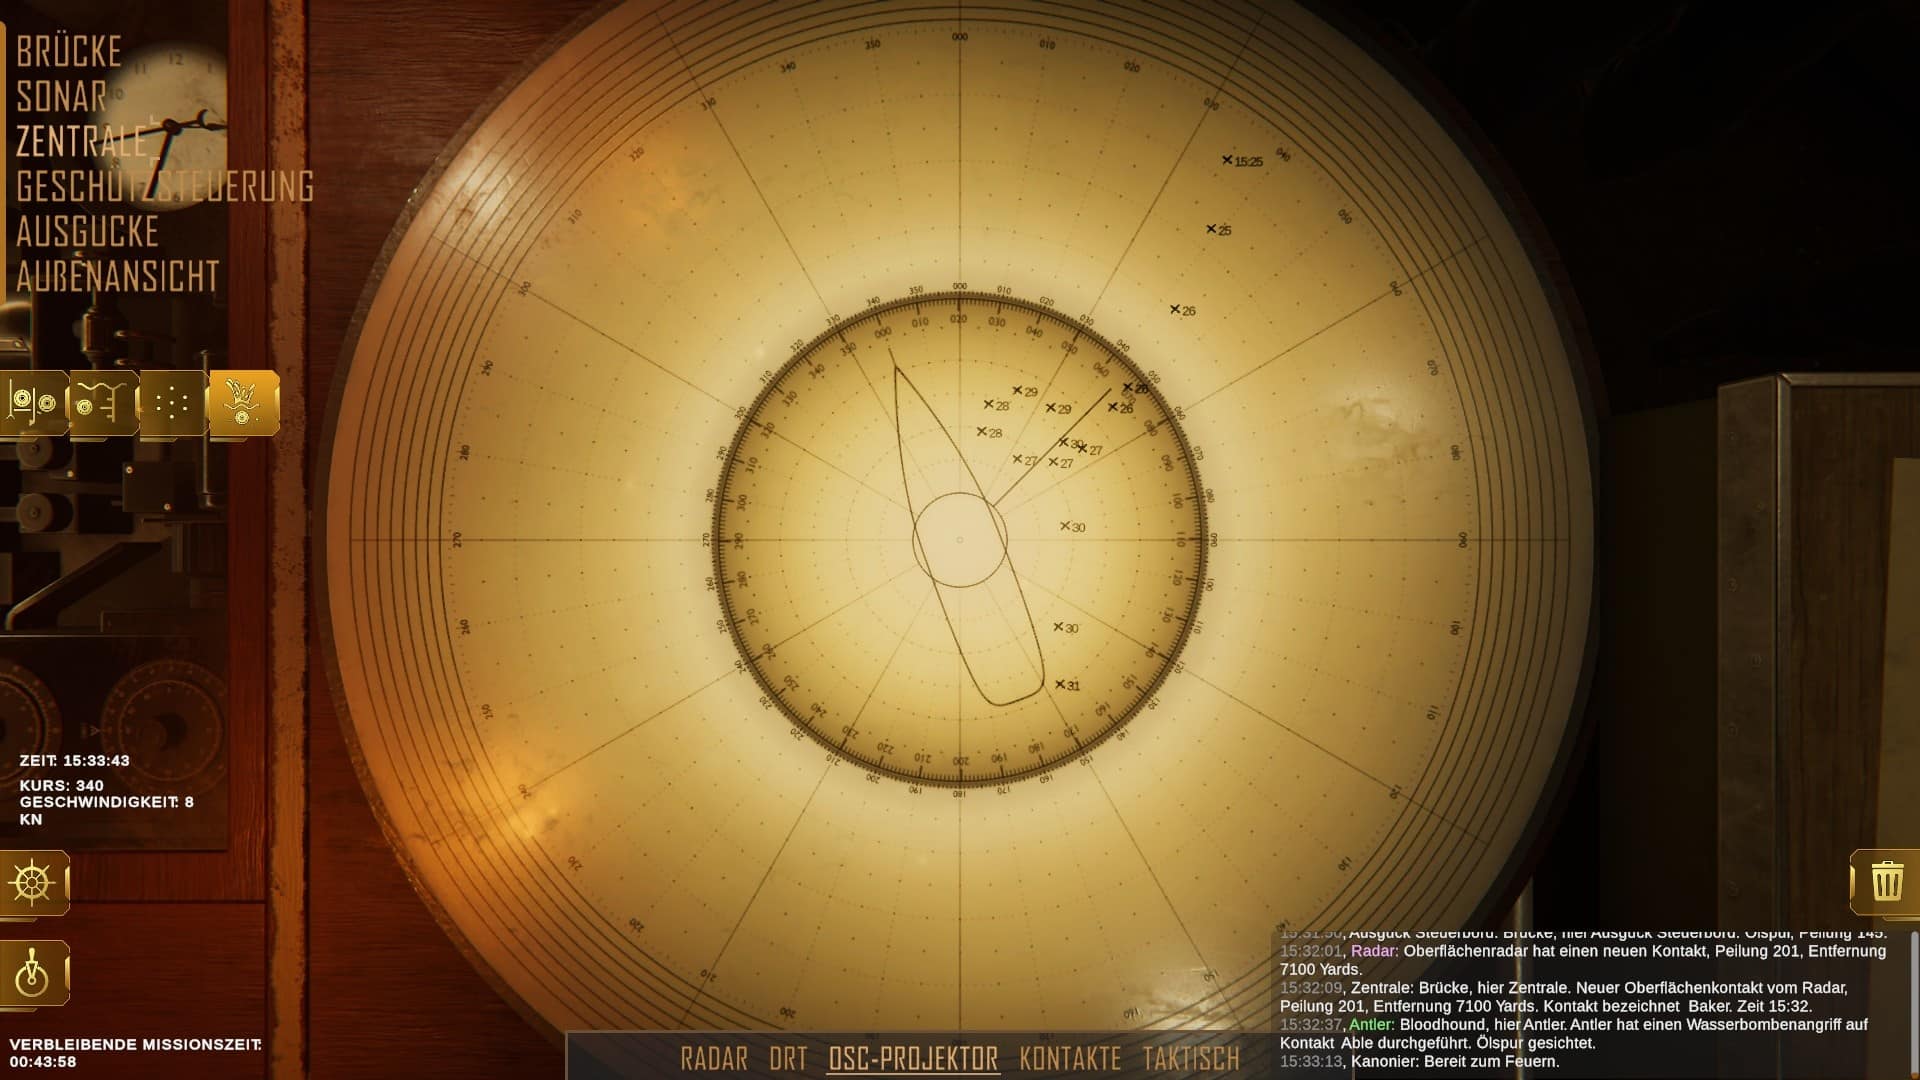 (With the OSC we can track contacts very precisely; the rotating disc in the middle is our ship.)